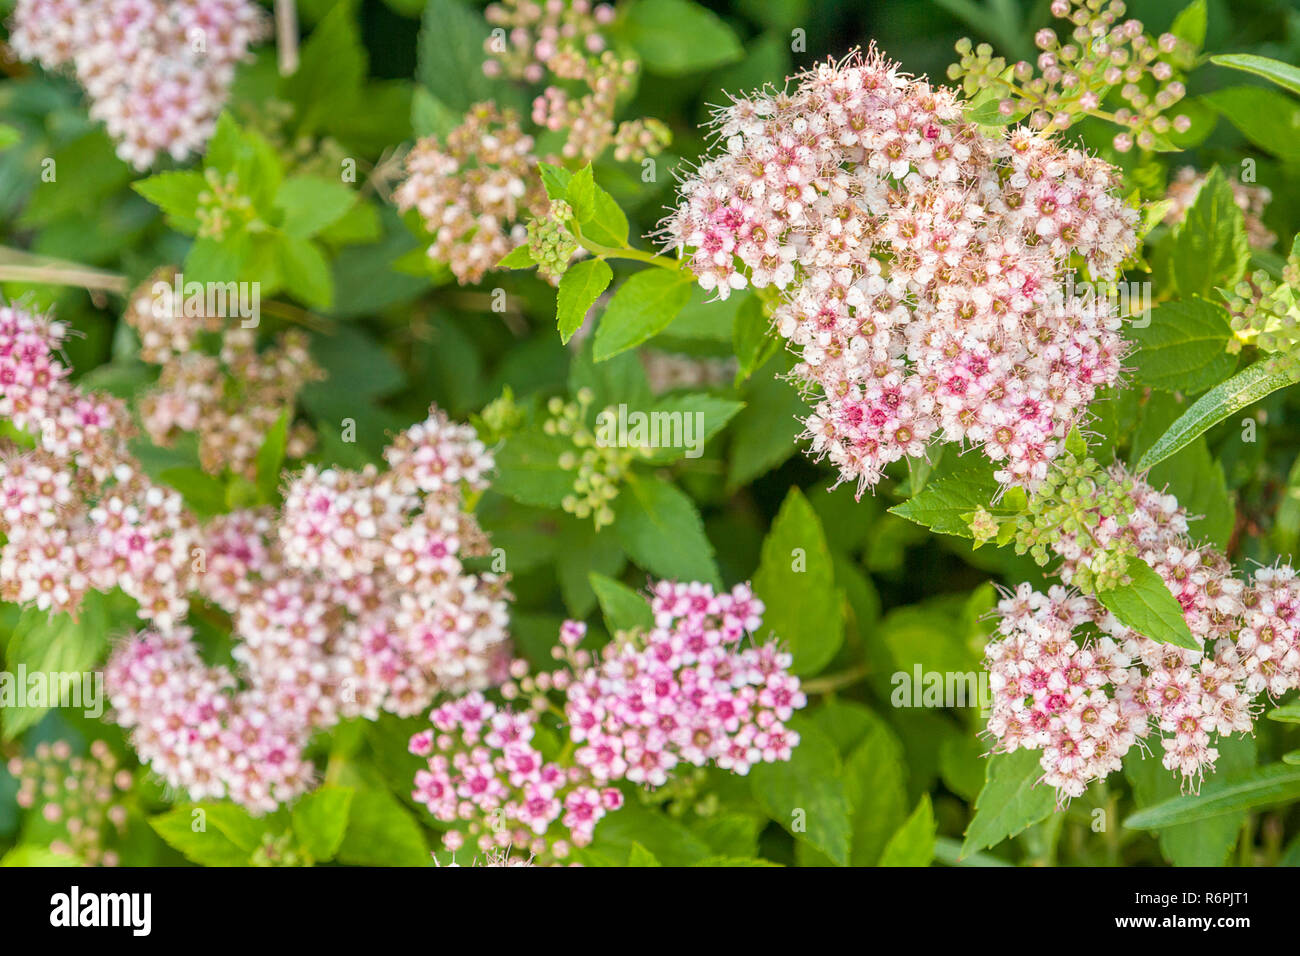 pink flower clusters Stock Photo